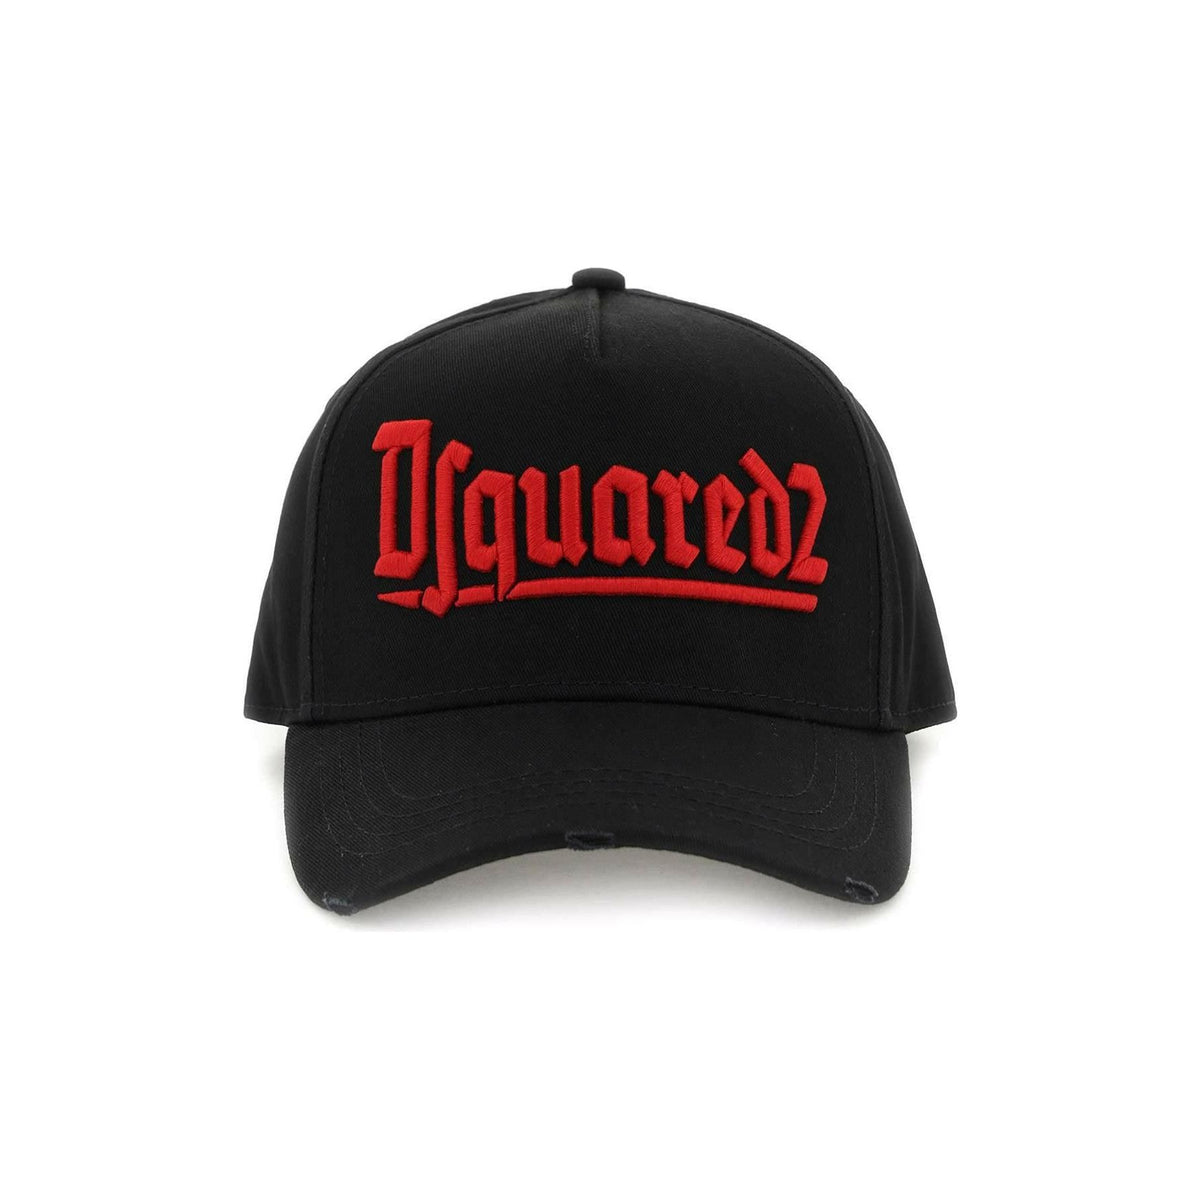 DSQUARED2 - Black and Red Gothic Embroidered Baseball Cap - JOHN JULIA